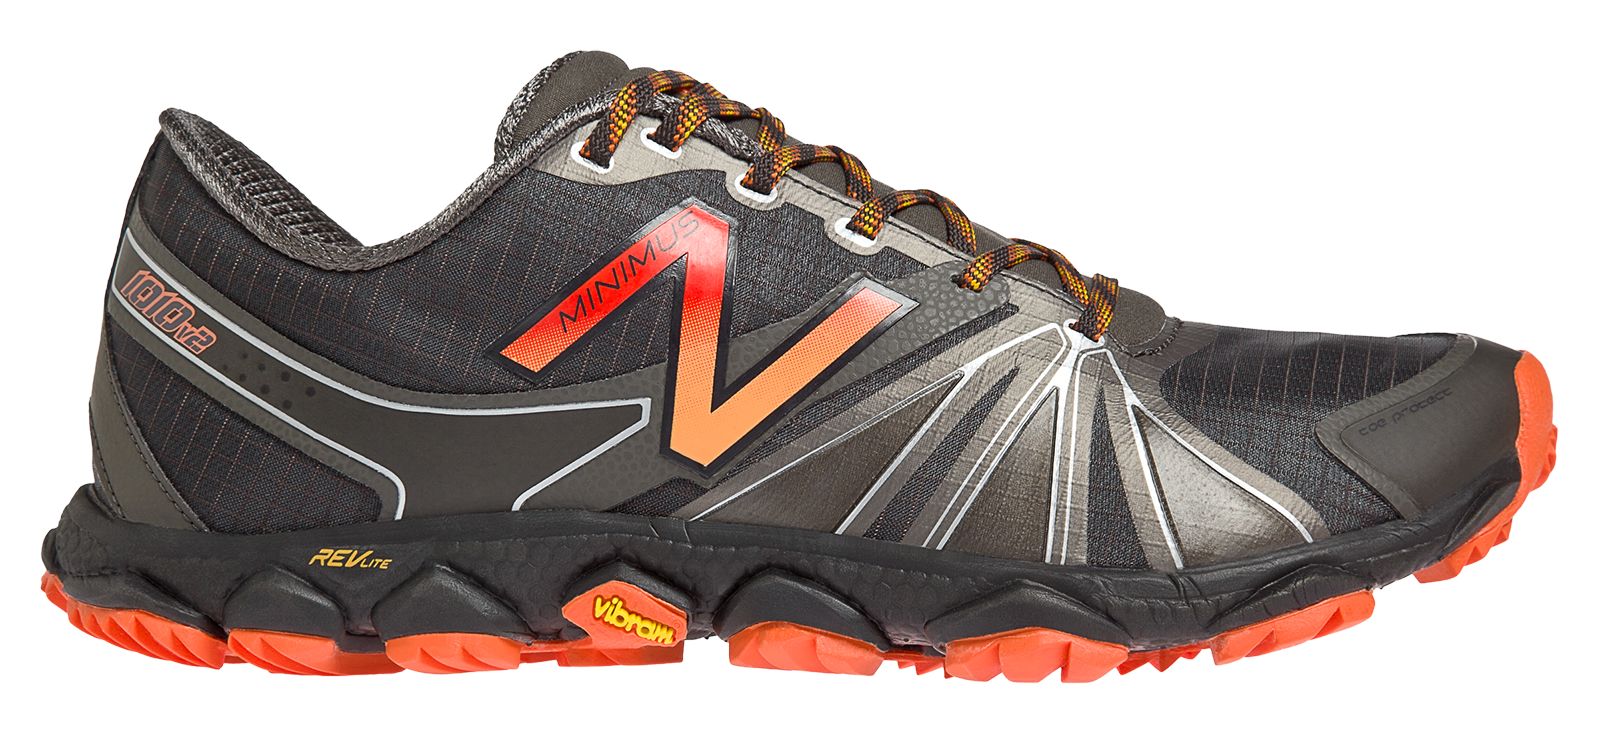 New Balance Minimus 1010v2 - Review - Trail And RunningTrail Ultra Running